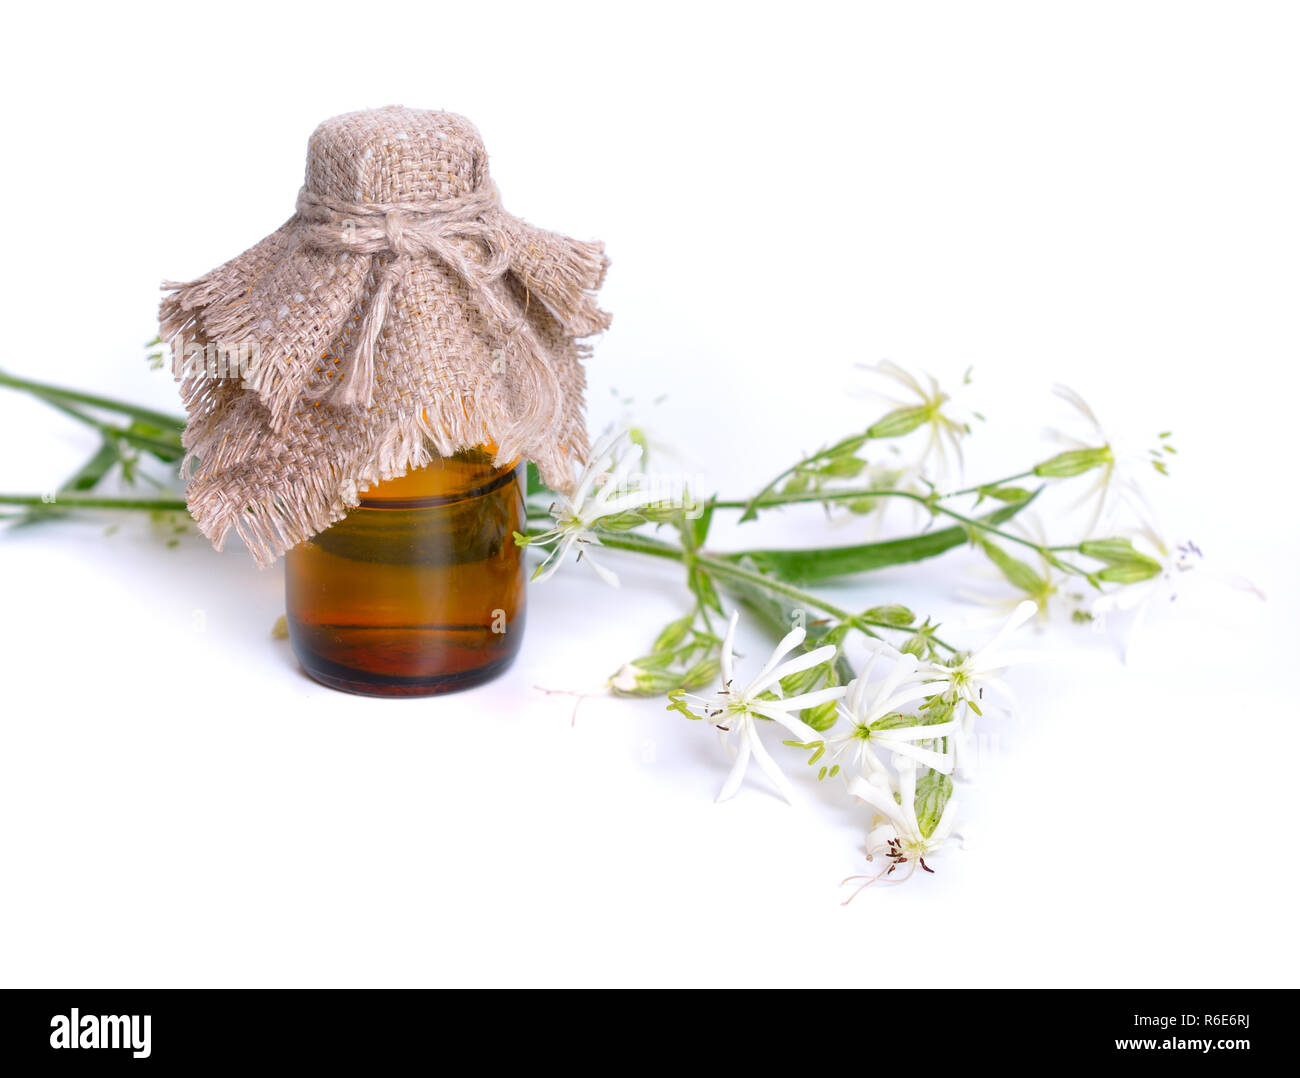 Silene nutans, most commonly known as Nottingham catchfly. With pharmaceutical bottle on white background. Stock Photo